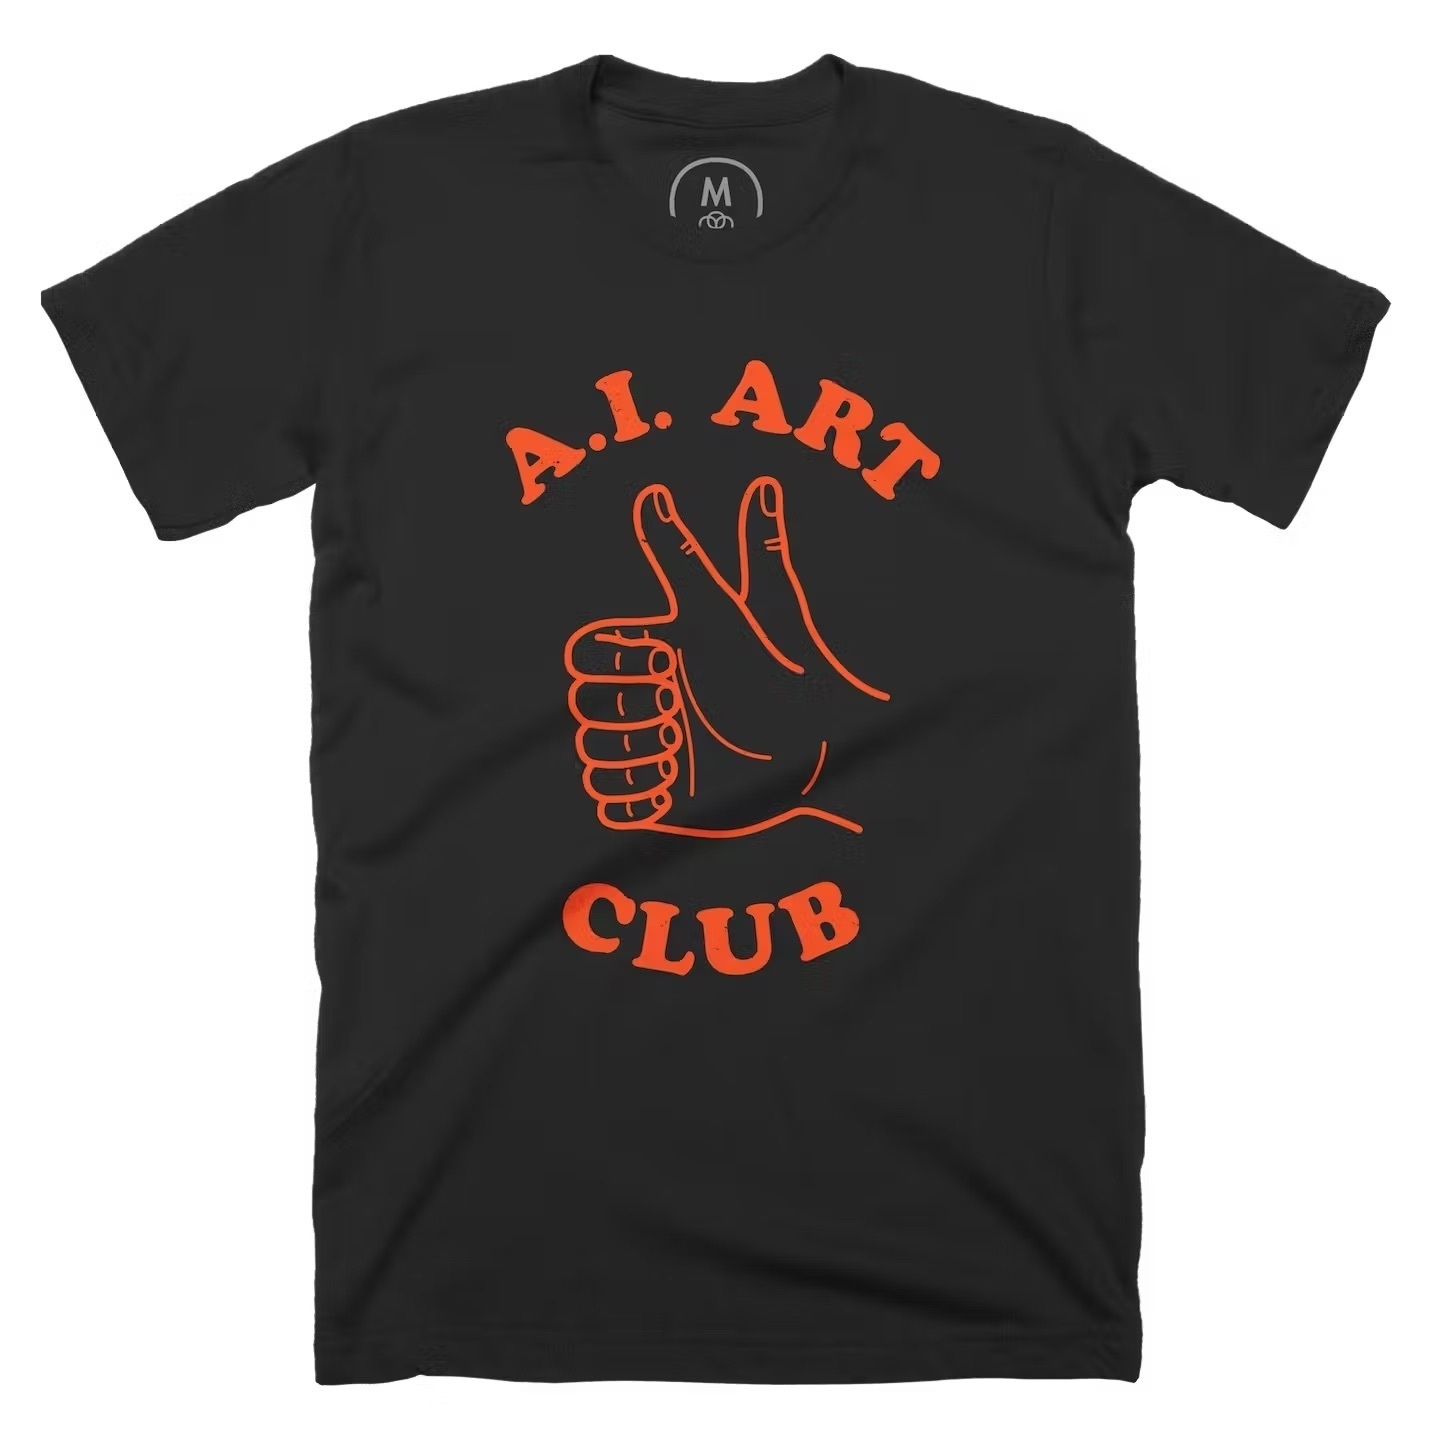 Black shirt with an orange colored illustration of a hand giving the thumbs up sign with 2 thumbs. The words around the hand read “A.I. Art Club”